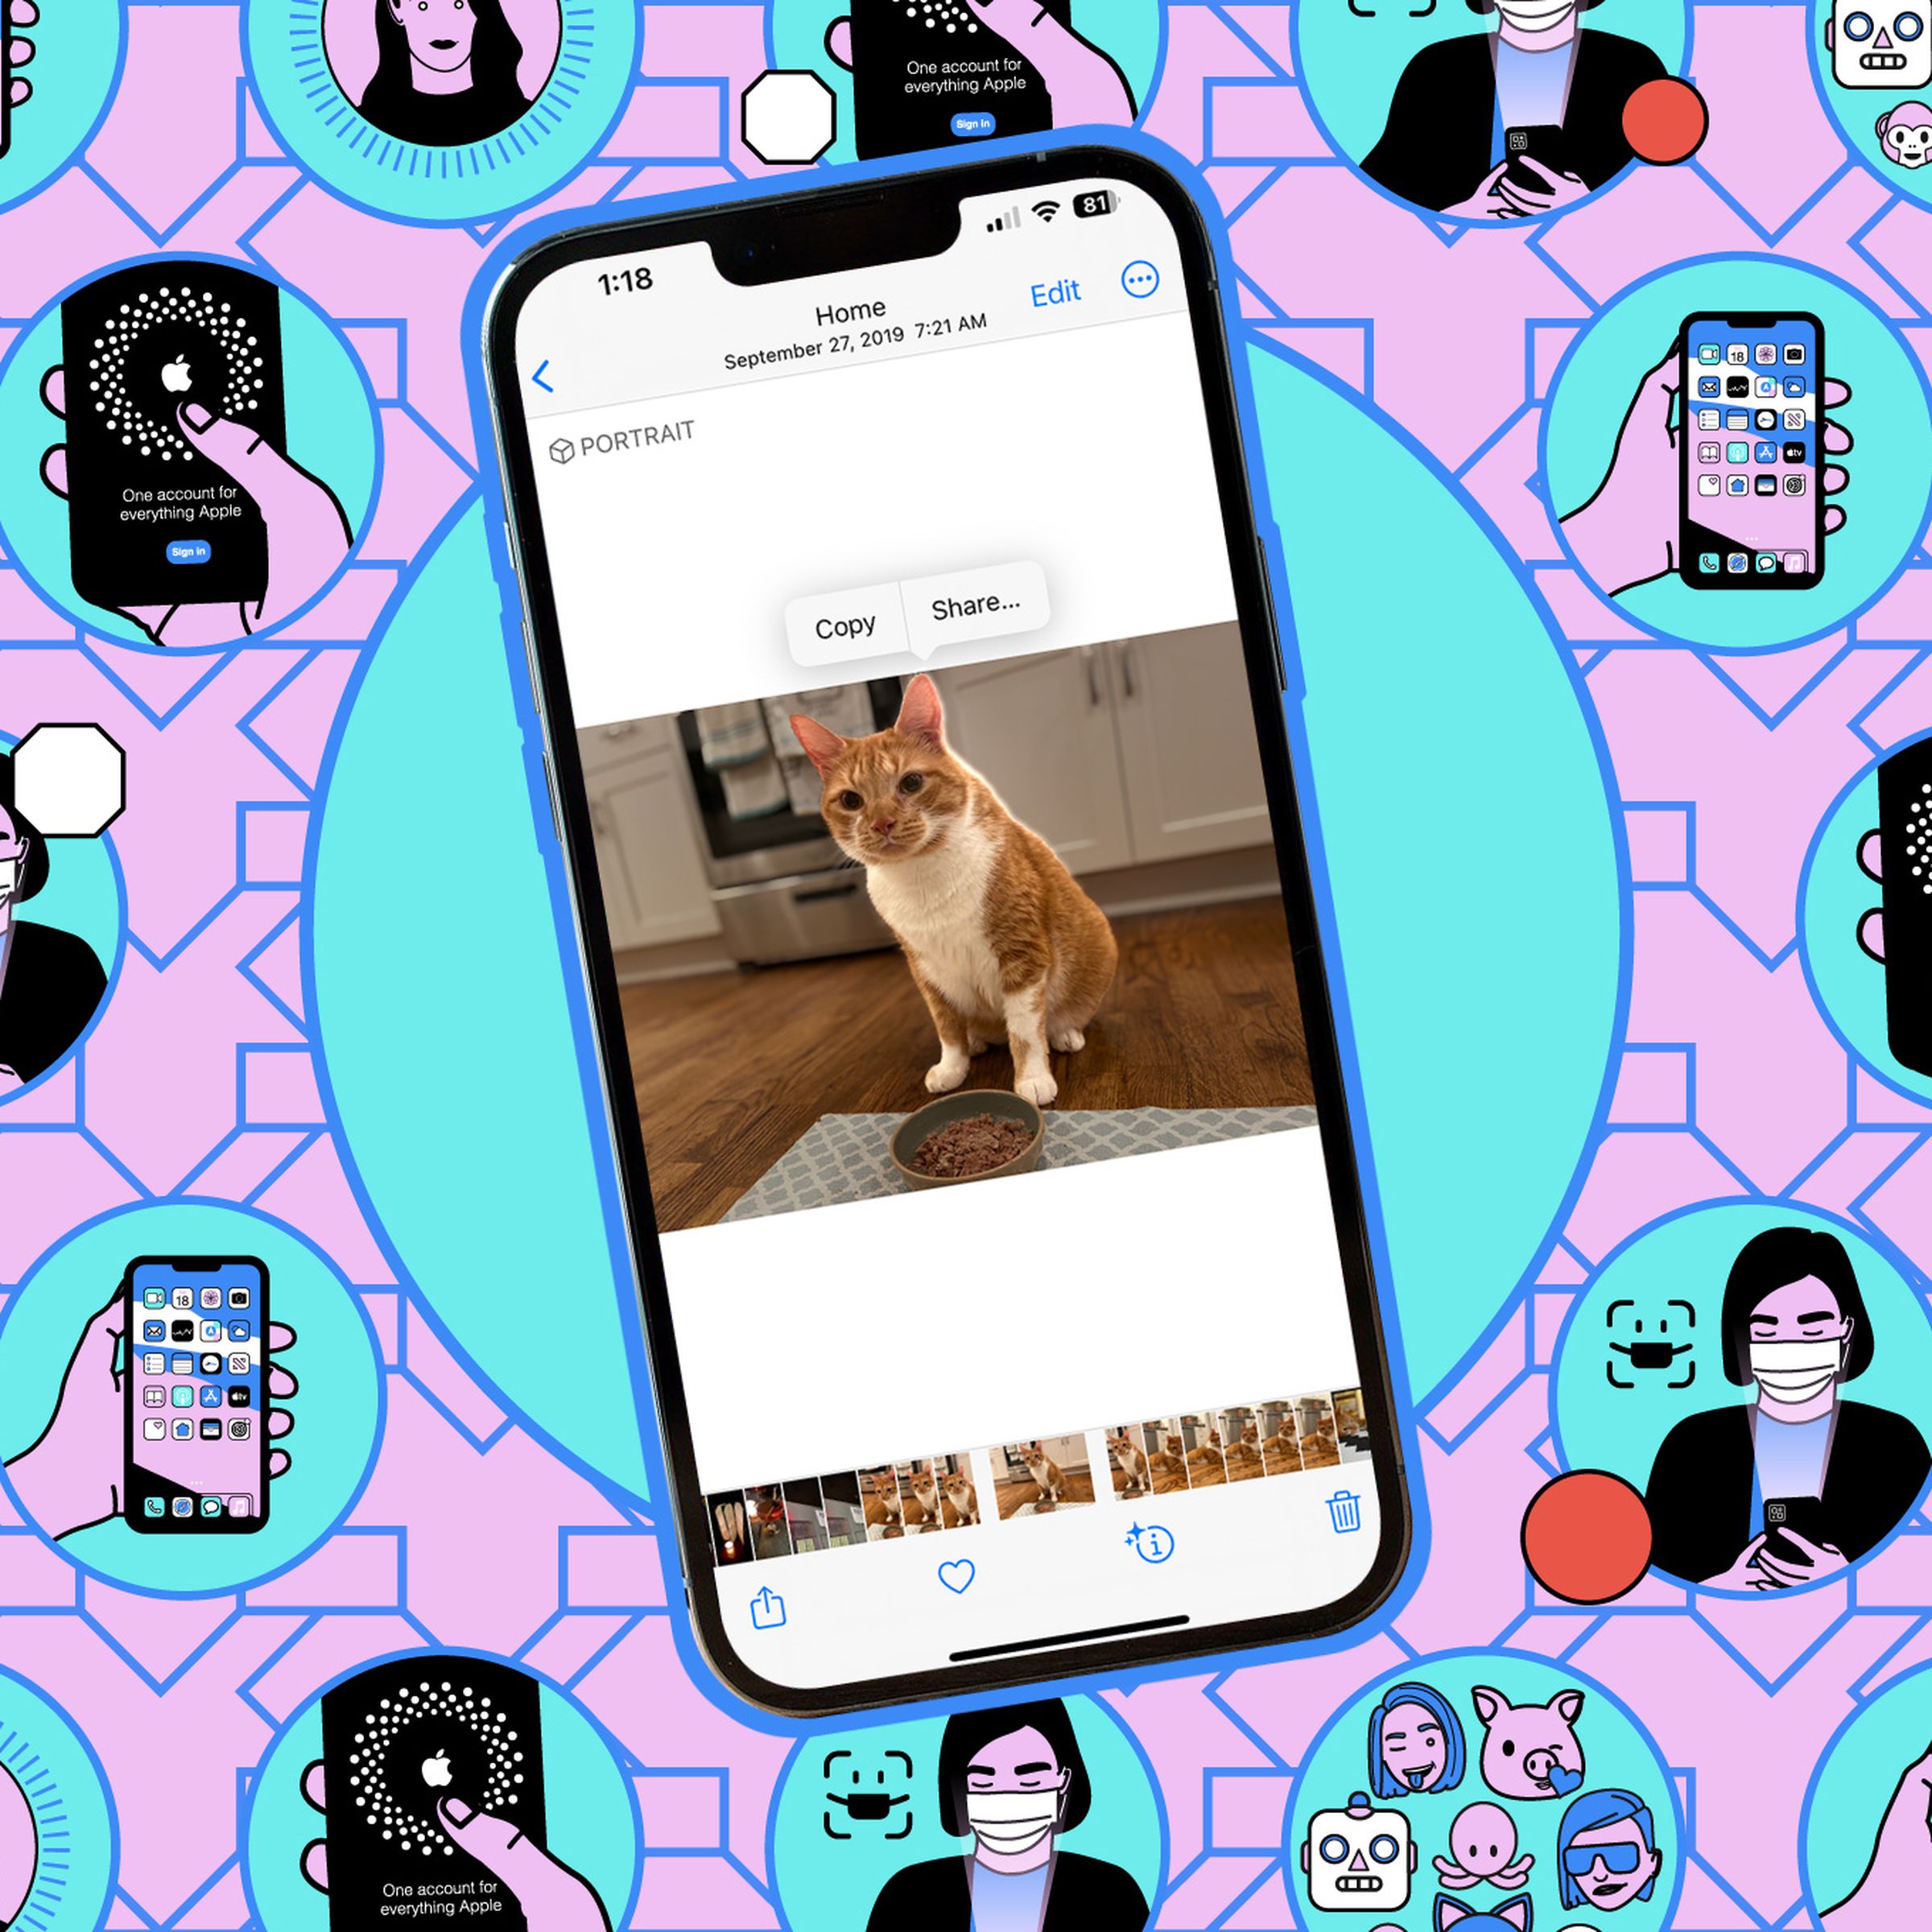 Illustration of a phone with a photo of a cat featured onscreen.